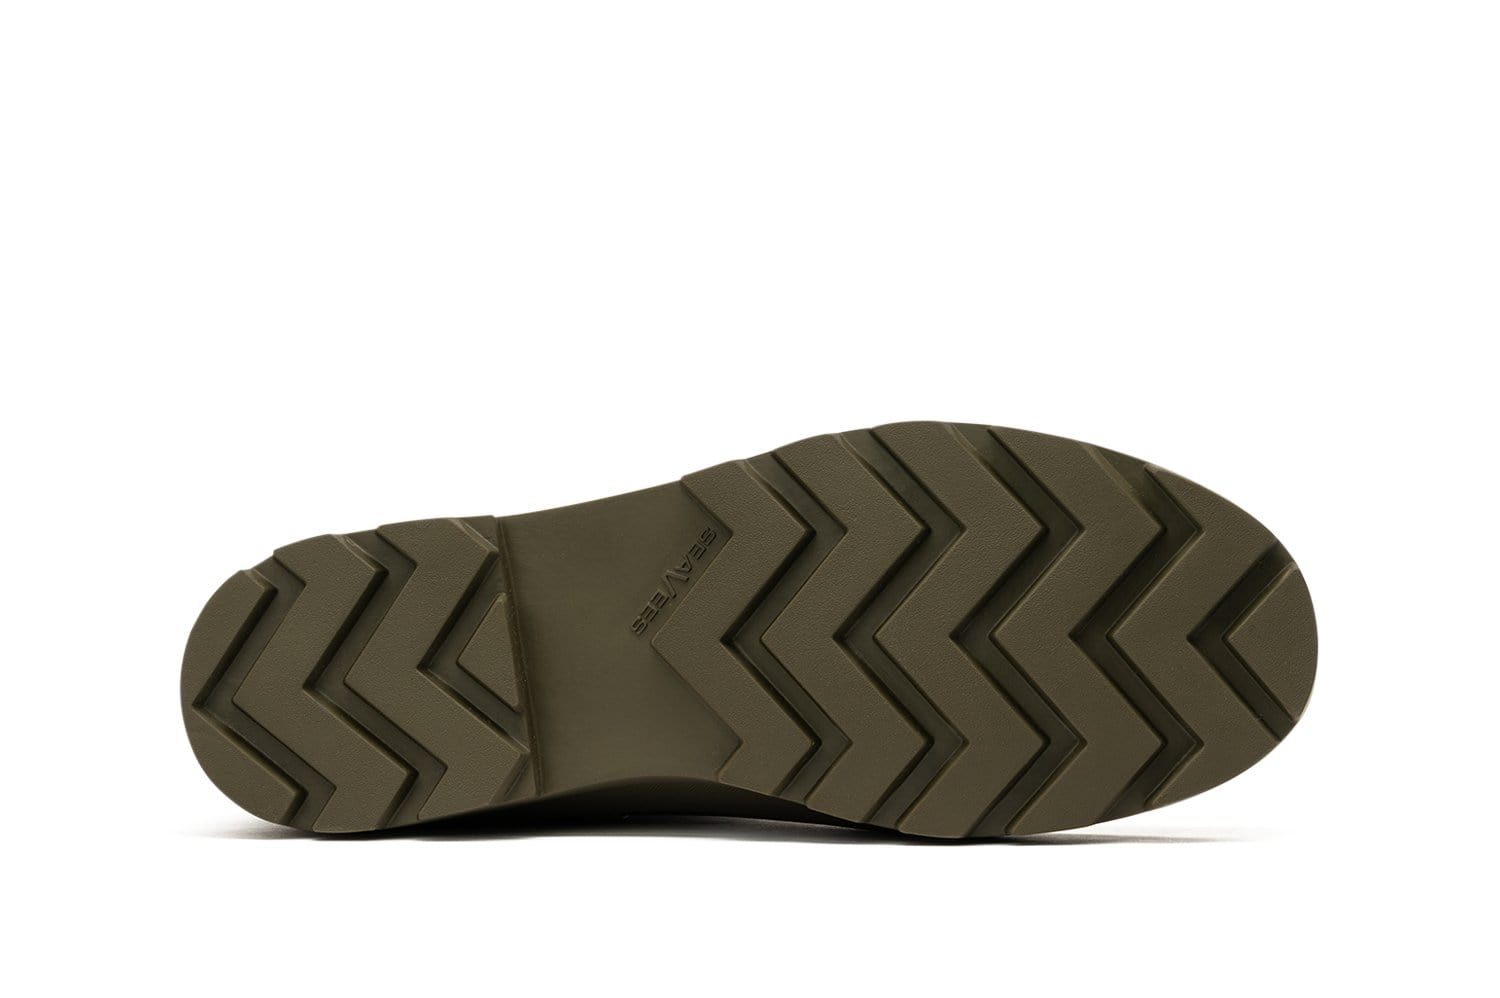 Sole view of Bolinas Off Shore Boot in Military Olive, showing the tread design.